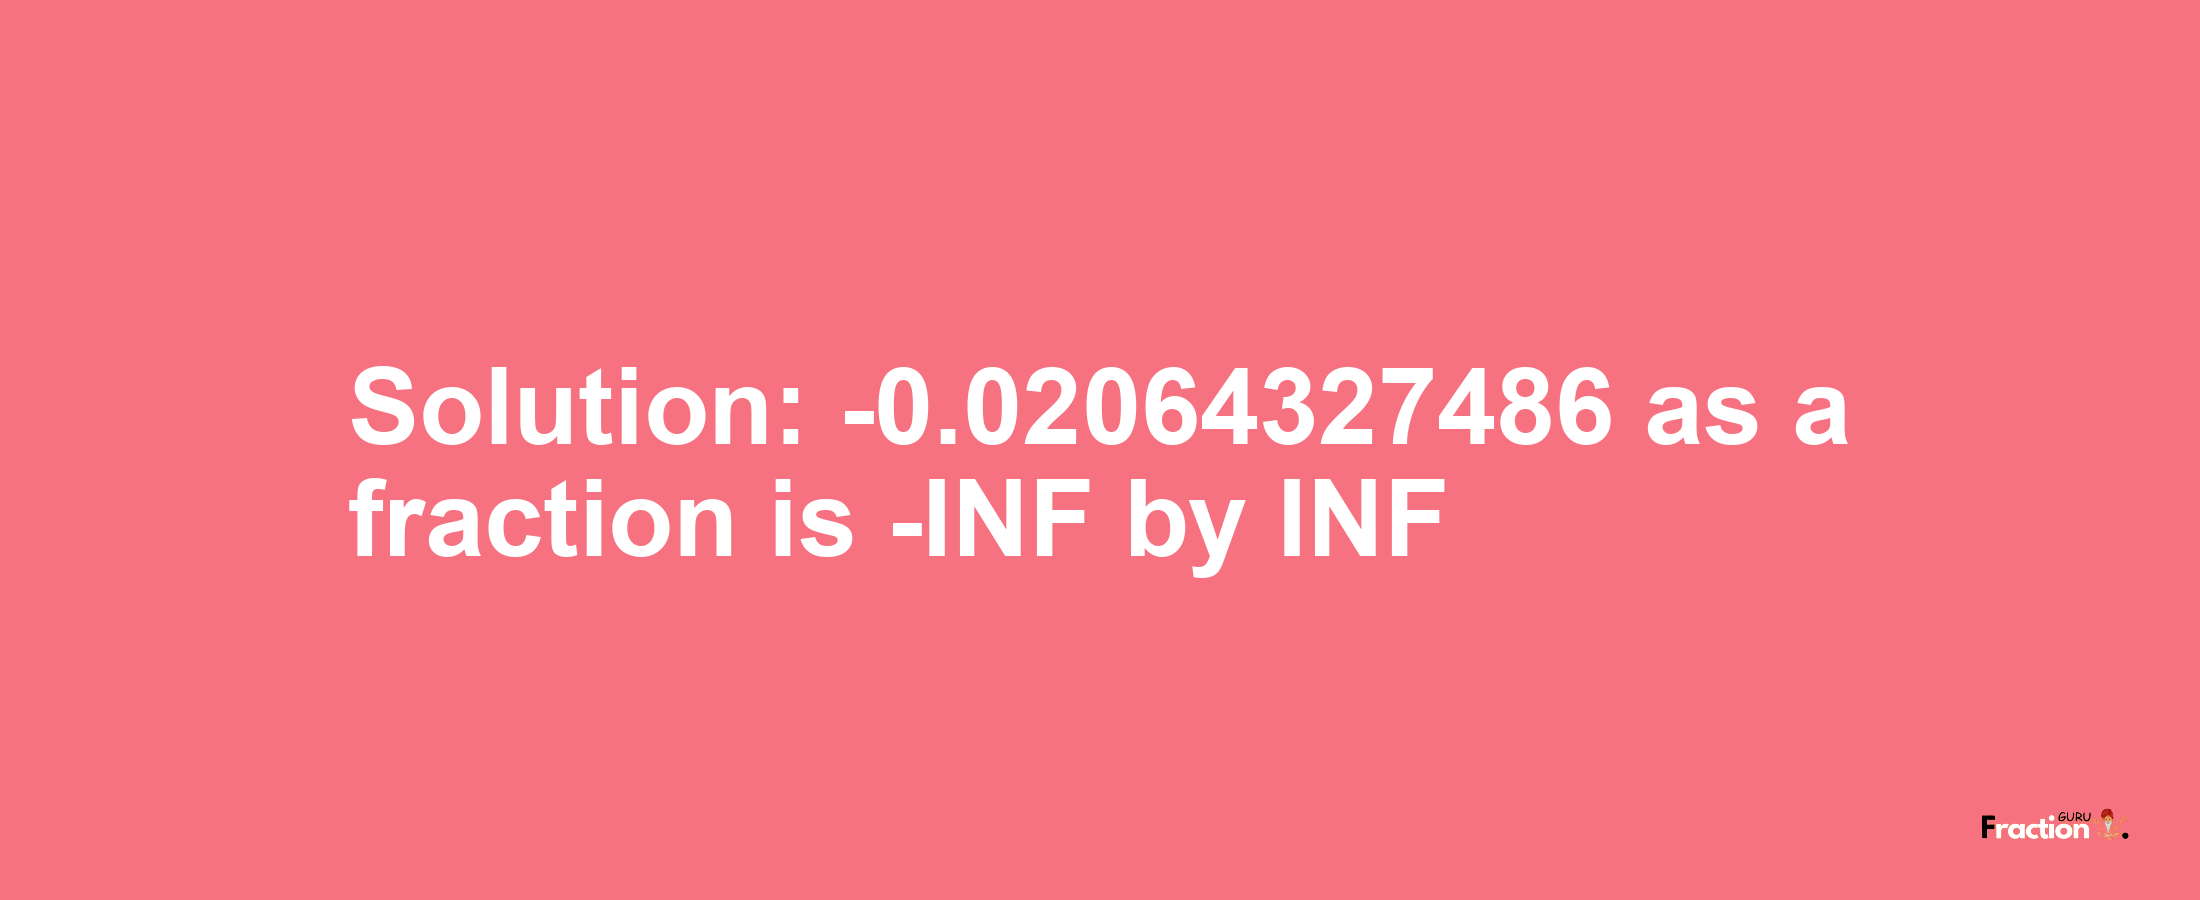 Solution:-0.02064327486 as a fraction is -INF/INF